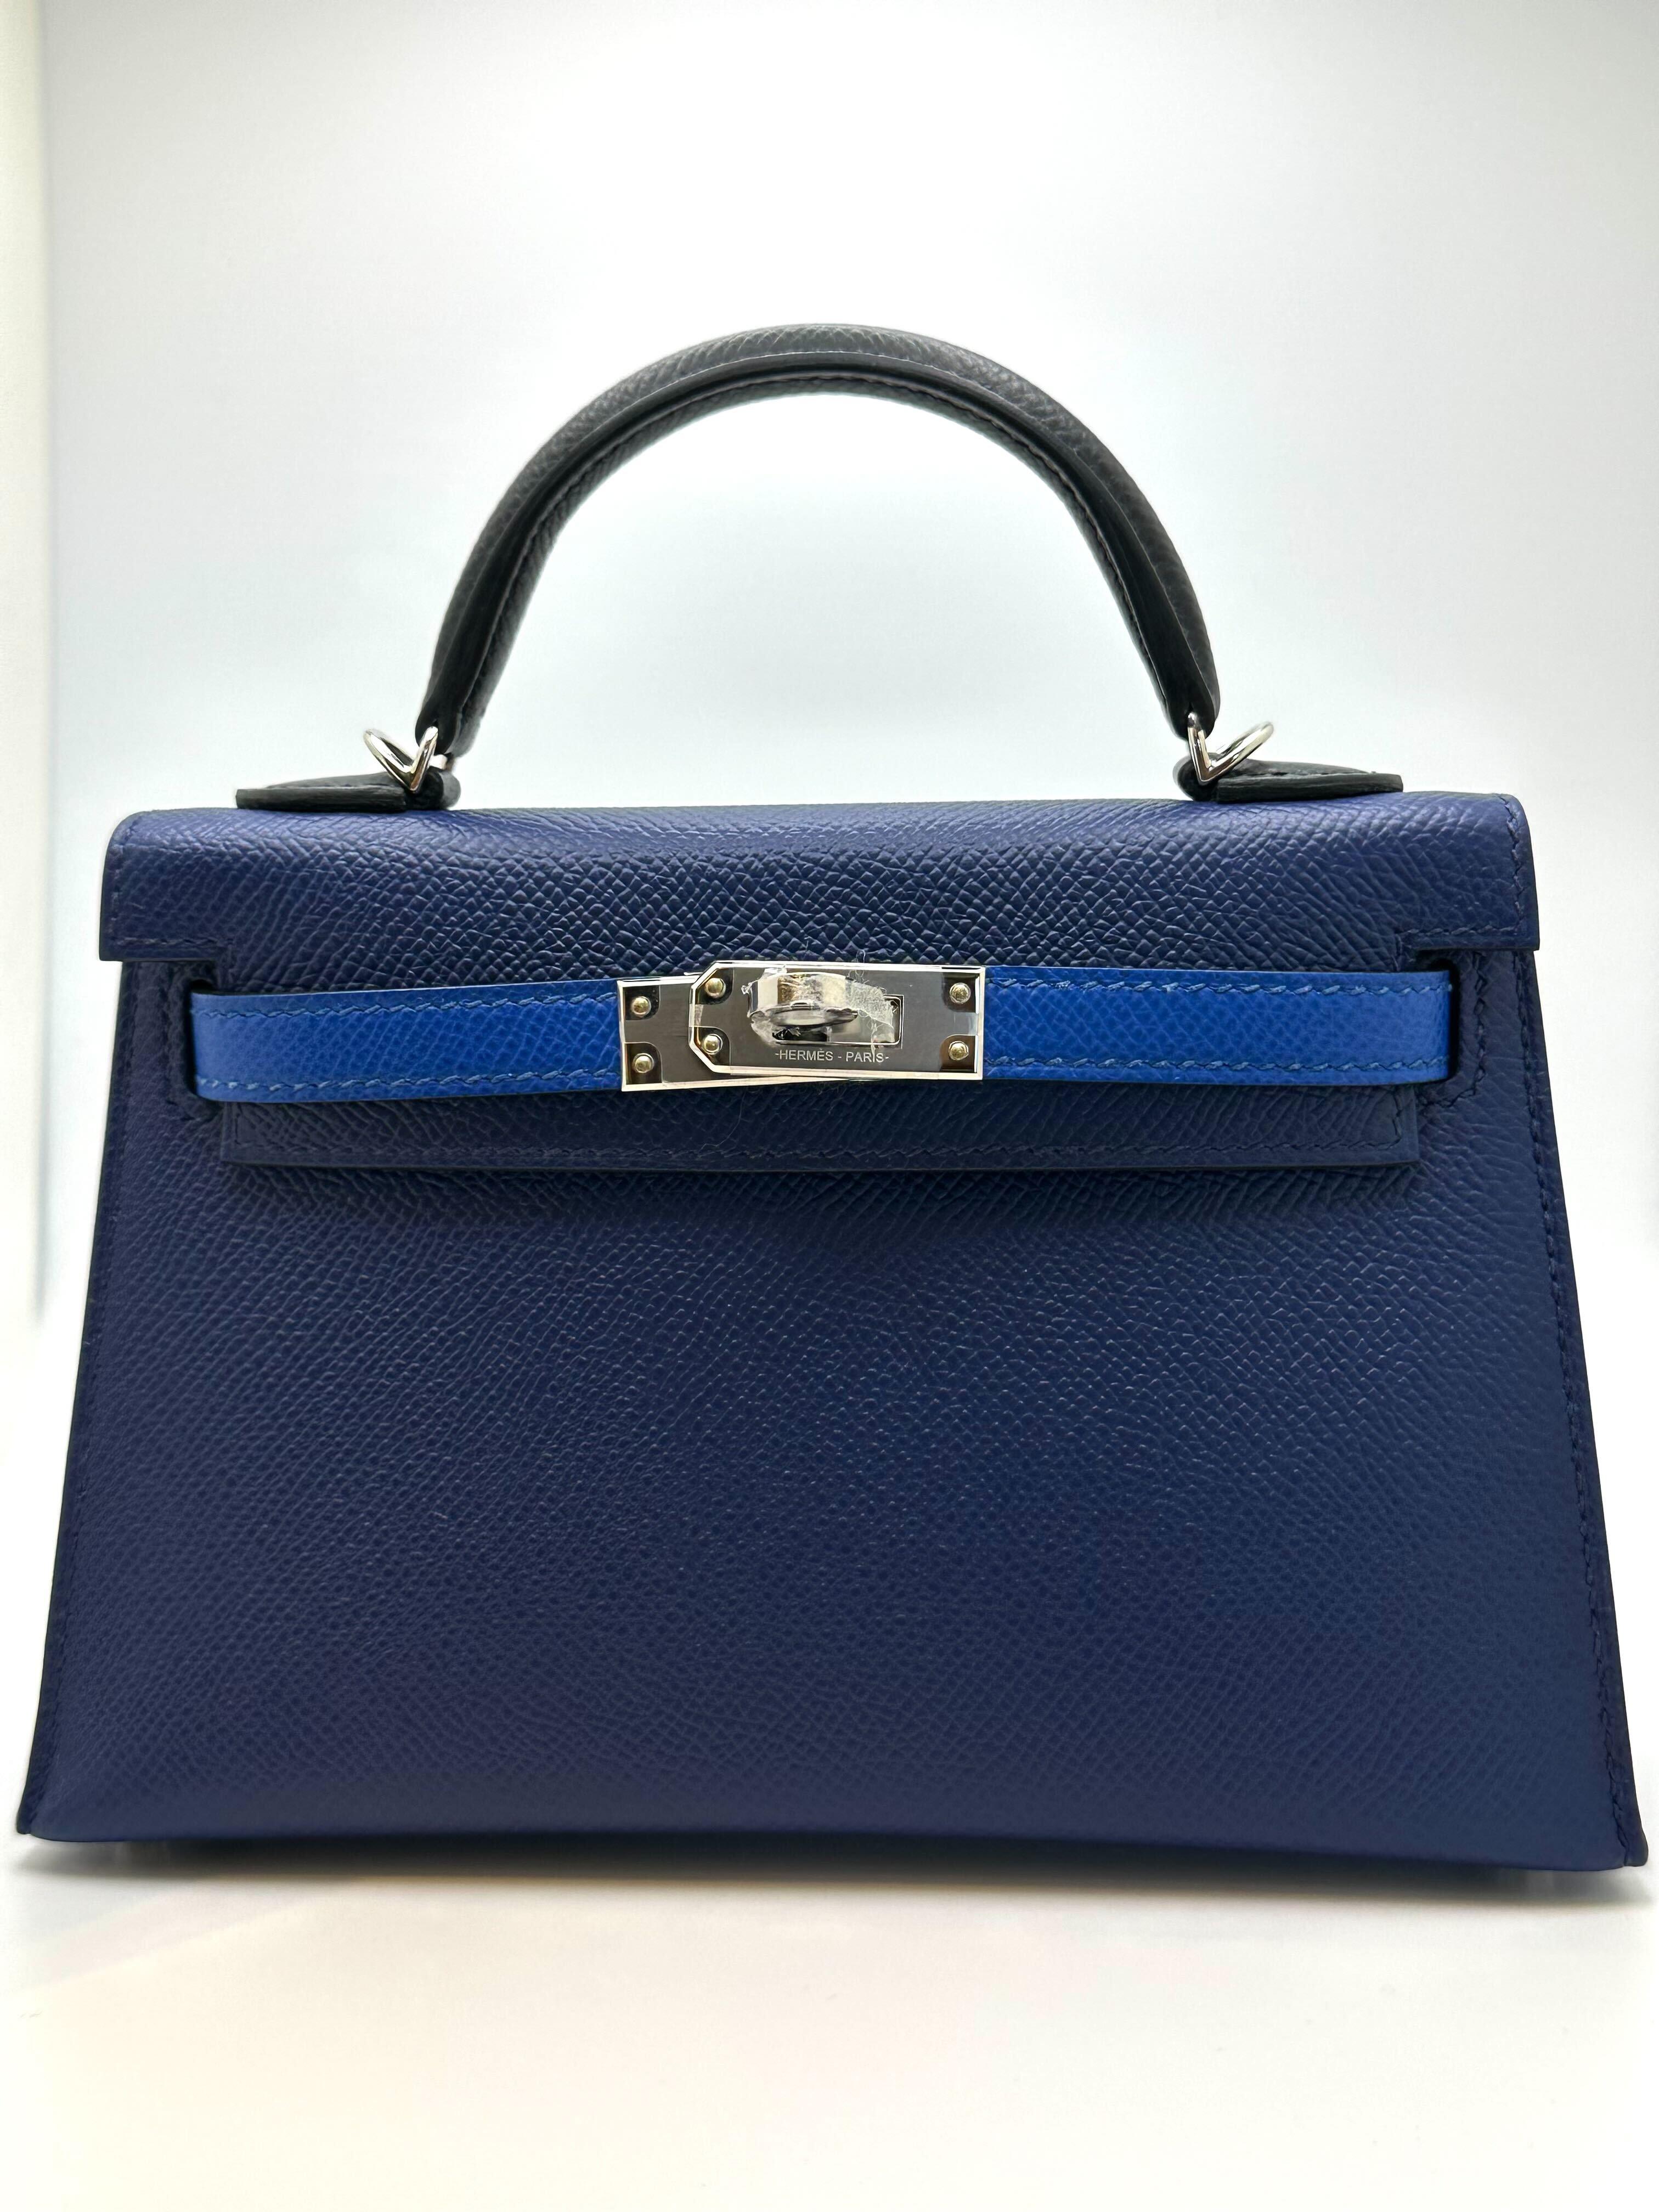 Hermes Kelly II Mini Sellier 20 Tricolore Blue Saphir/Blue France/Black, Palladium Hardware

Condition: New
Material: Epsom Leather
Measurements: 20cm x 16cm x 10cm 
Hardware: Palladium

*Comes with full original packaging.
*Full plastic on hardware.